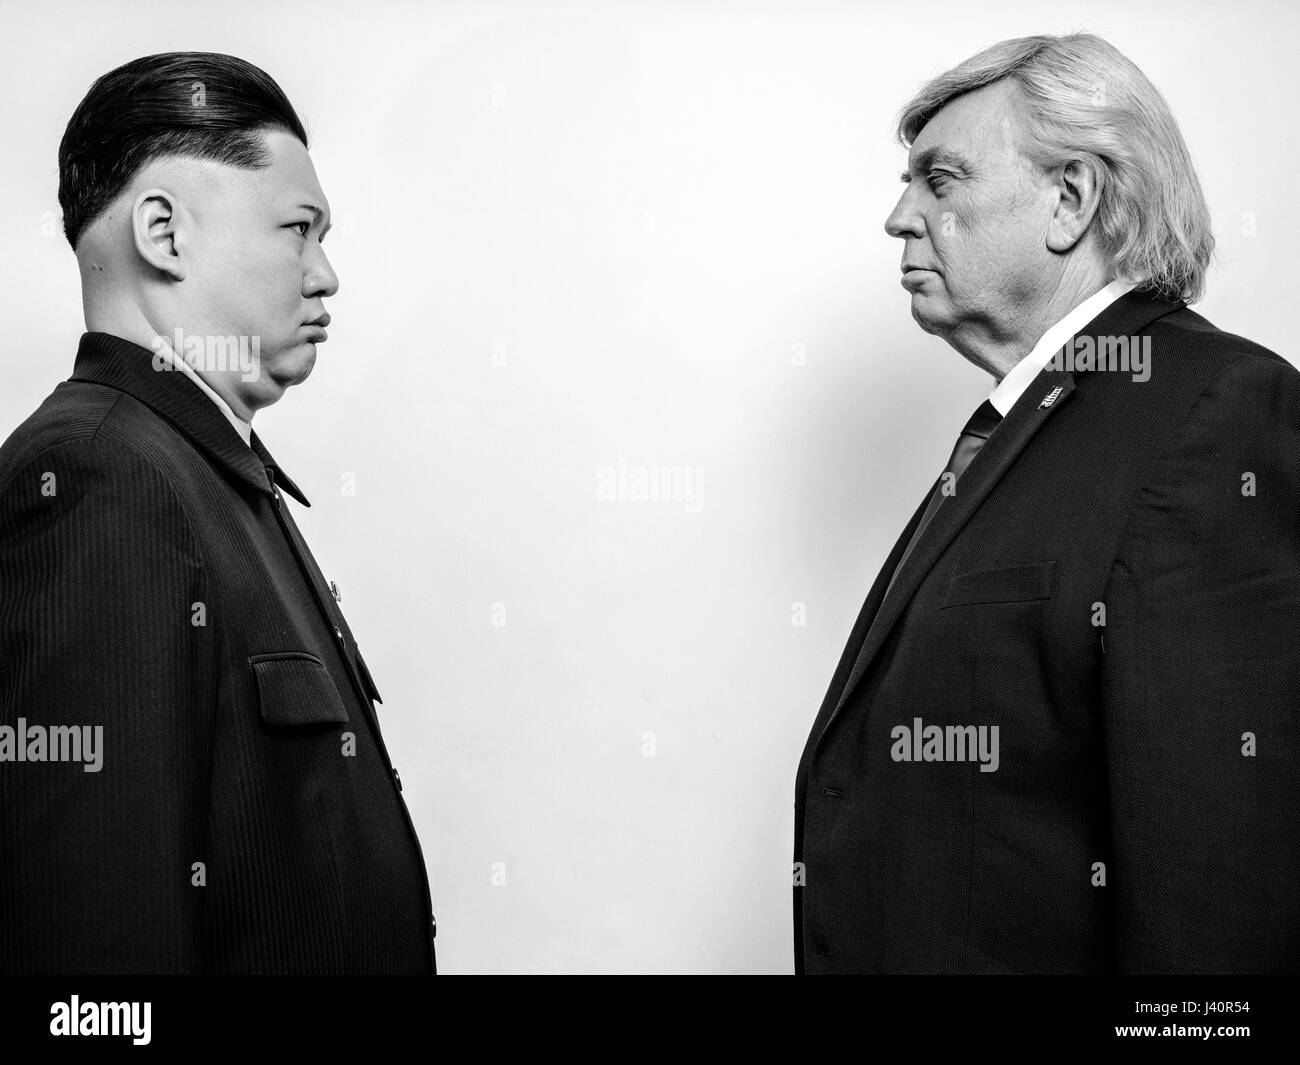 President Donald Trump lookalike and Supreme Leader of North Korea Kim Jong-Un lookalike portrait shoot.  An unlikely love story of two dictators. Stock Photo